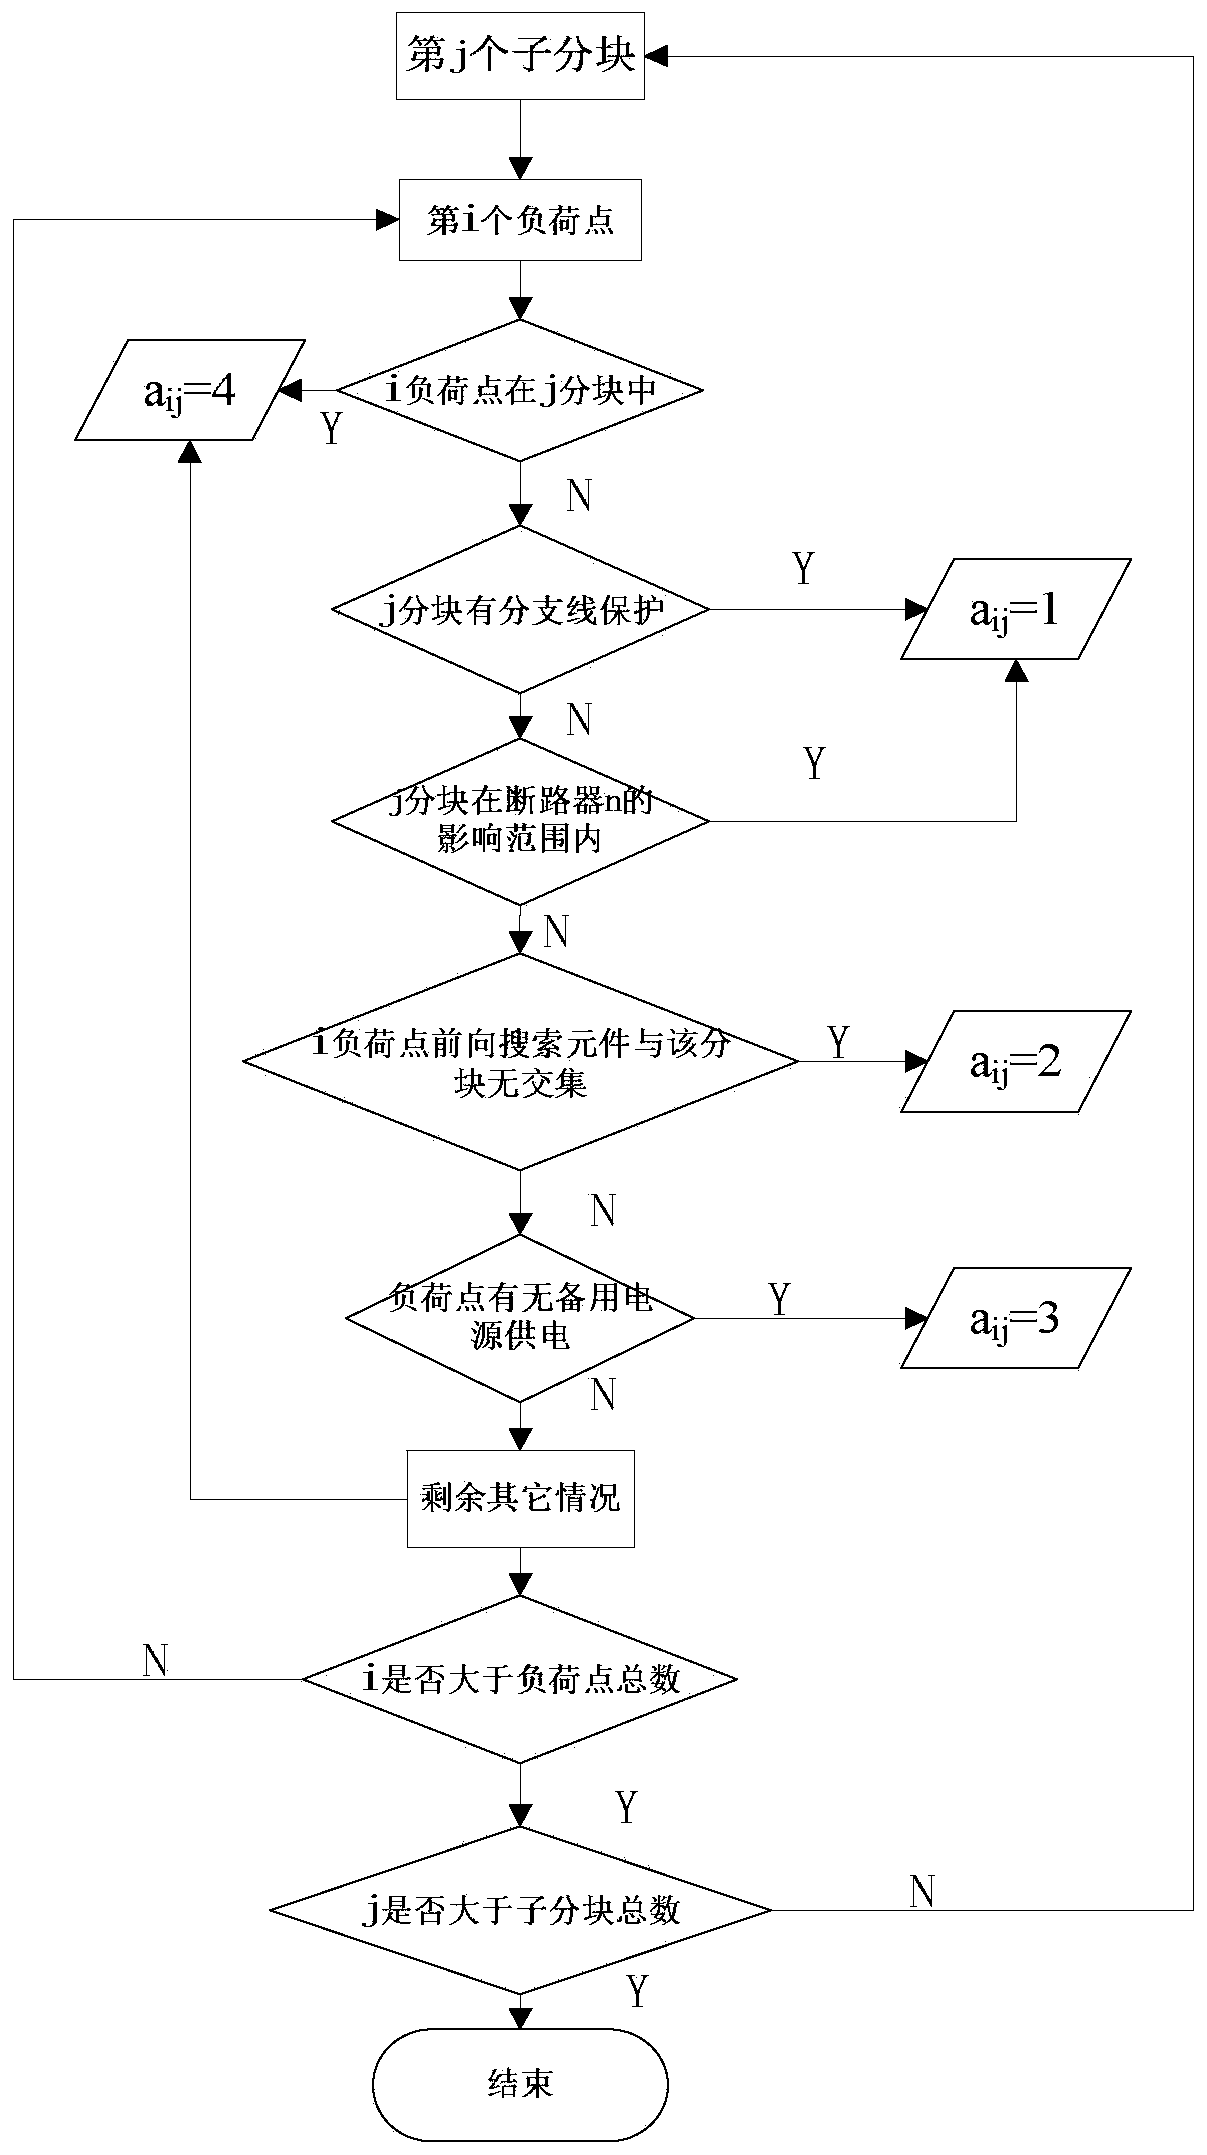 Structure complex distribution network reliability evaluation method based on diffusion theory